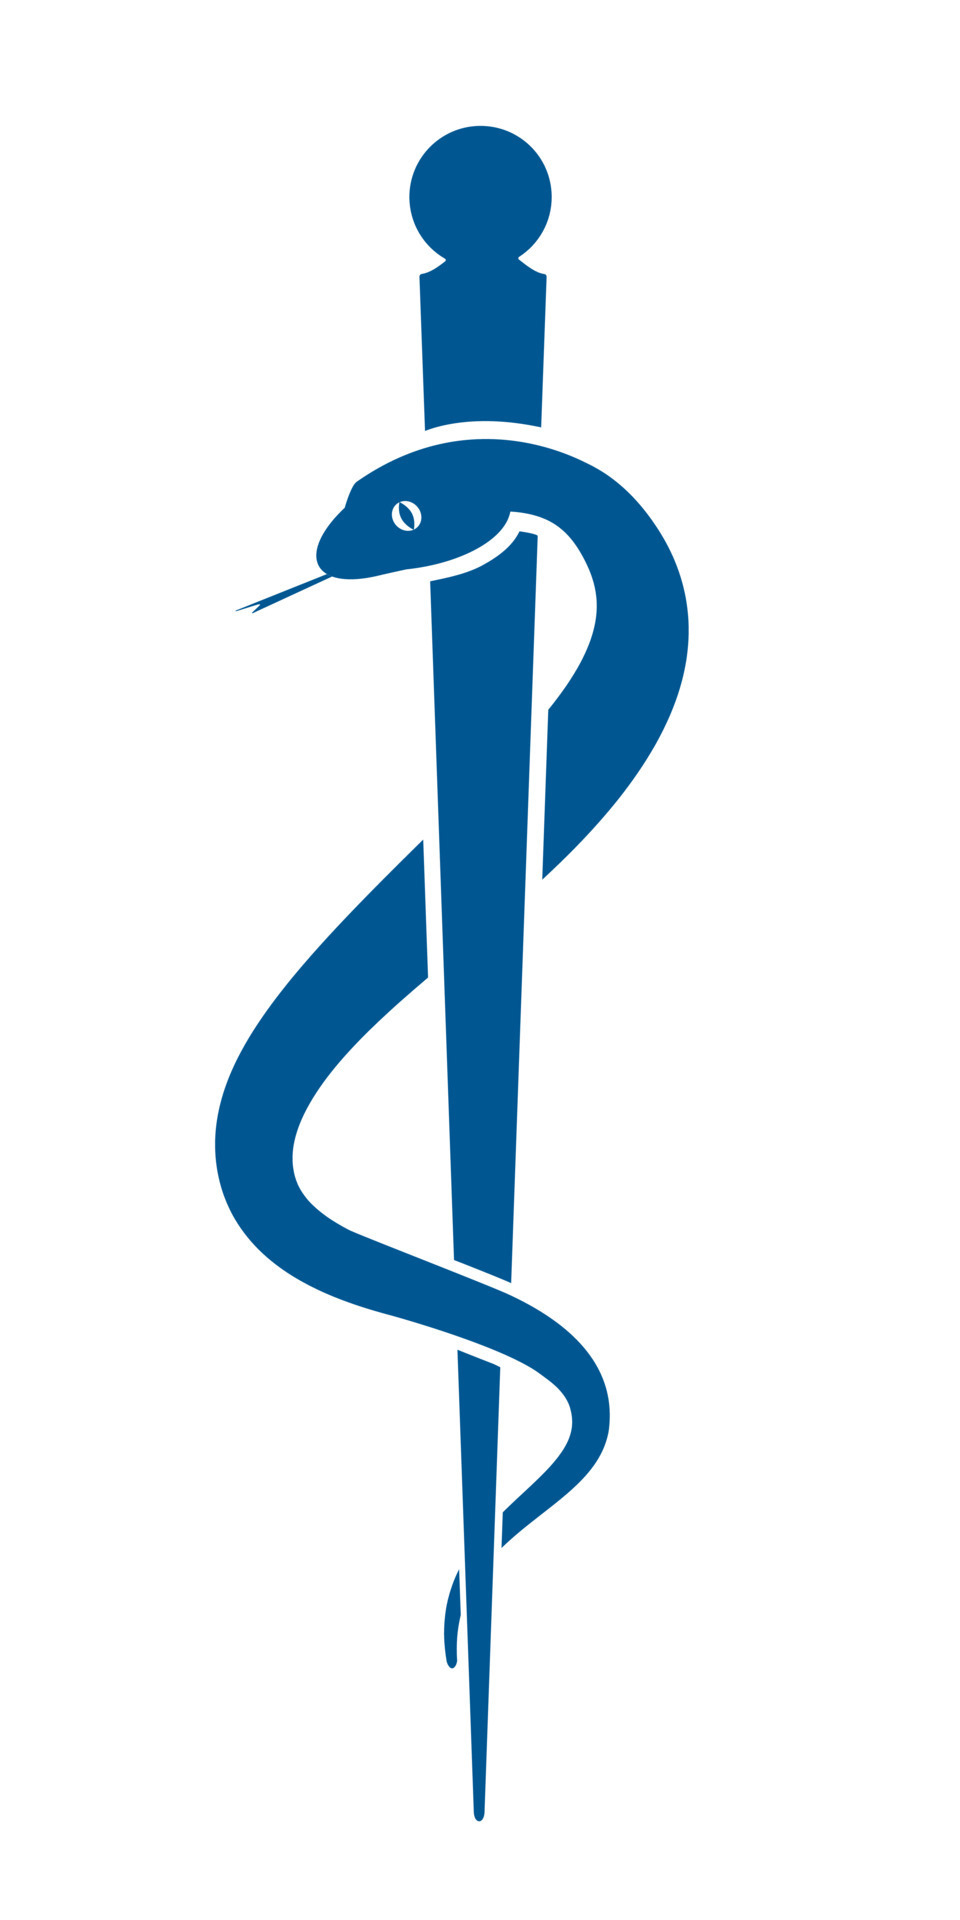 Rod of Asclepius pharmacy icon isolated on white. Symbol for drugstore ...